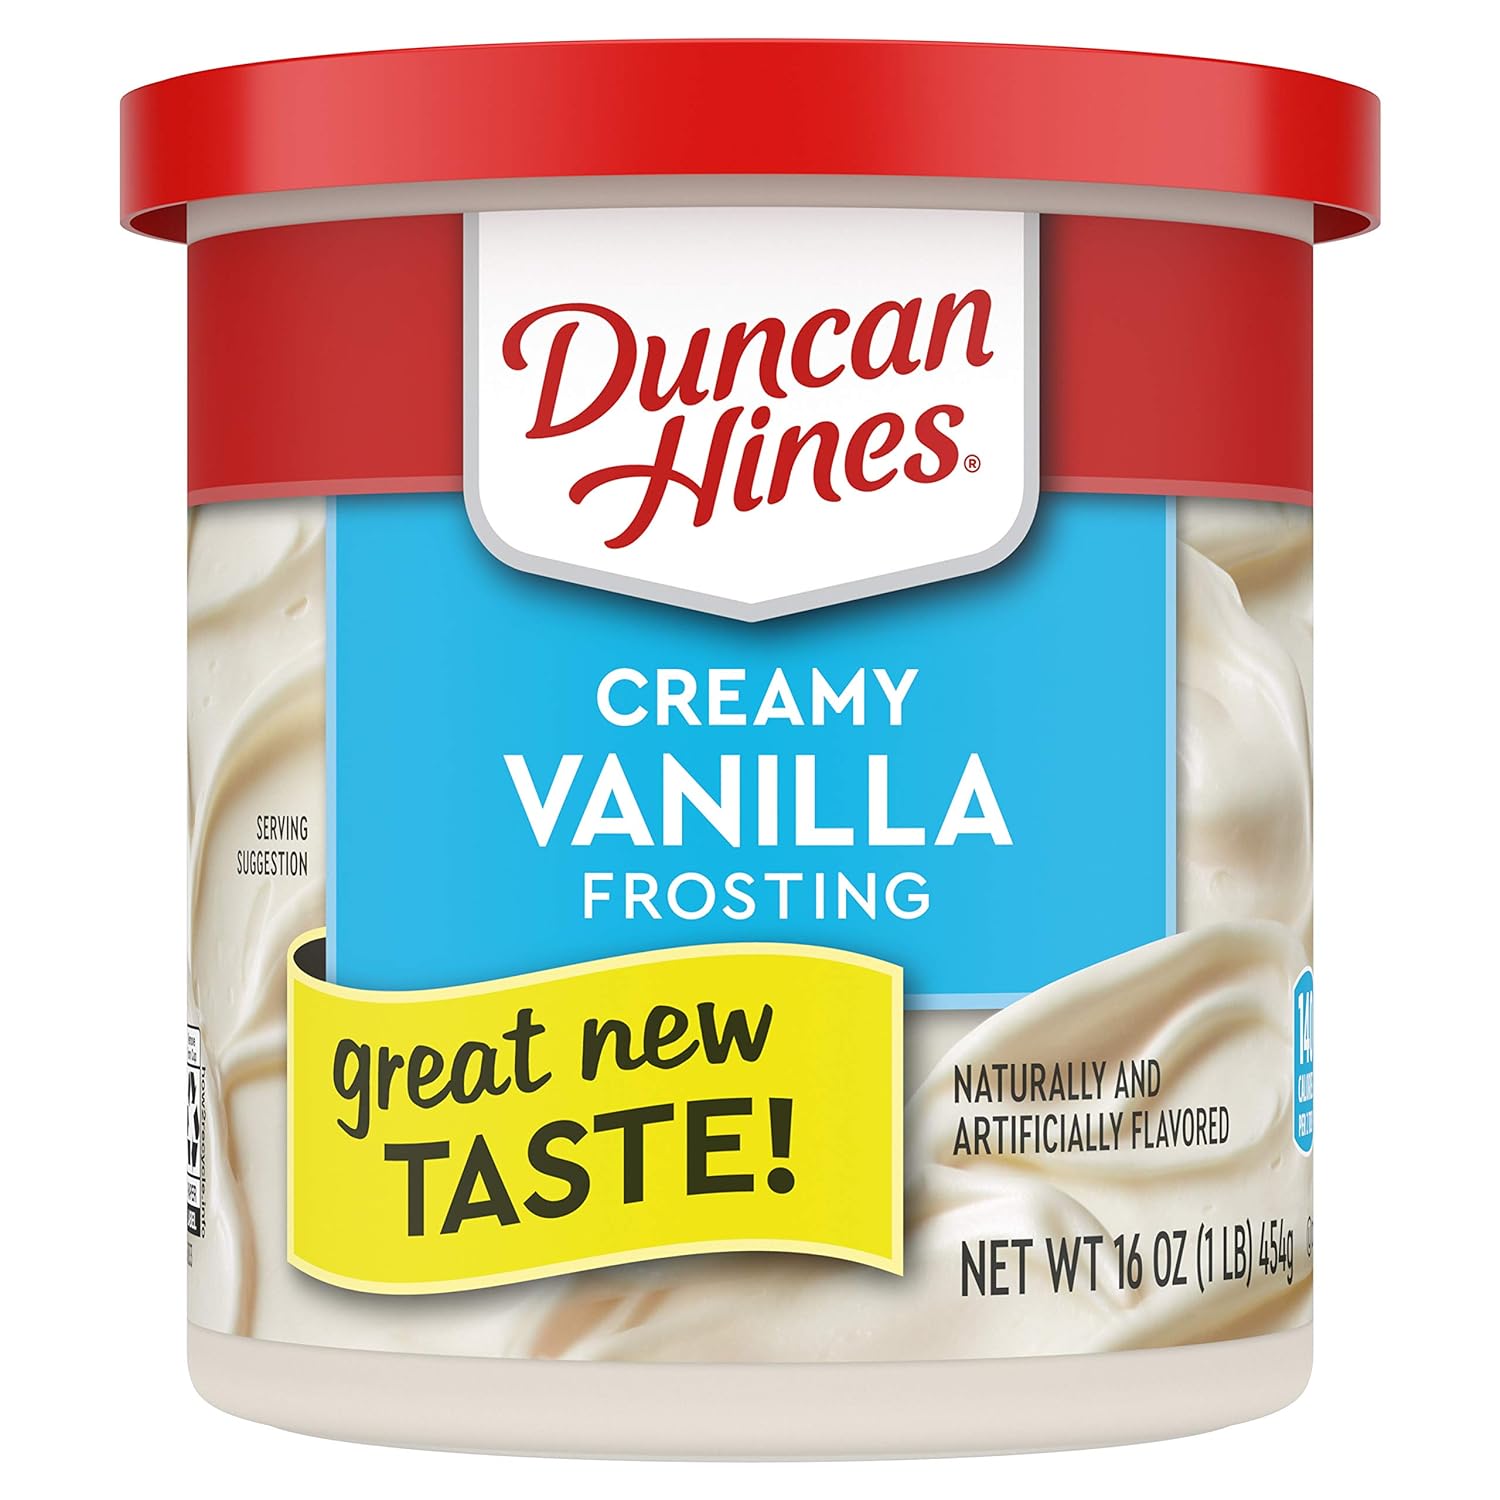 Duncan Hines Creamy Vanilla Flavored Frosting, 16 OZ Can of Dessert and Cake Frosting (8 Pack)